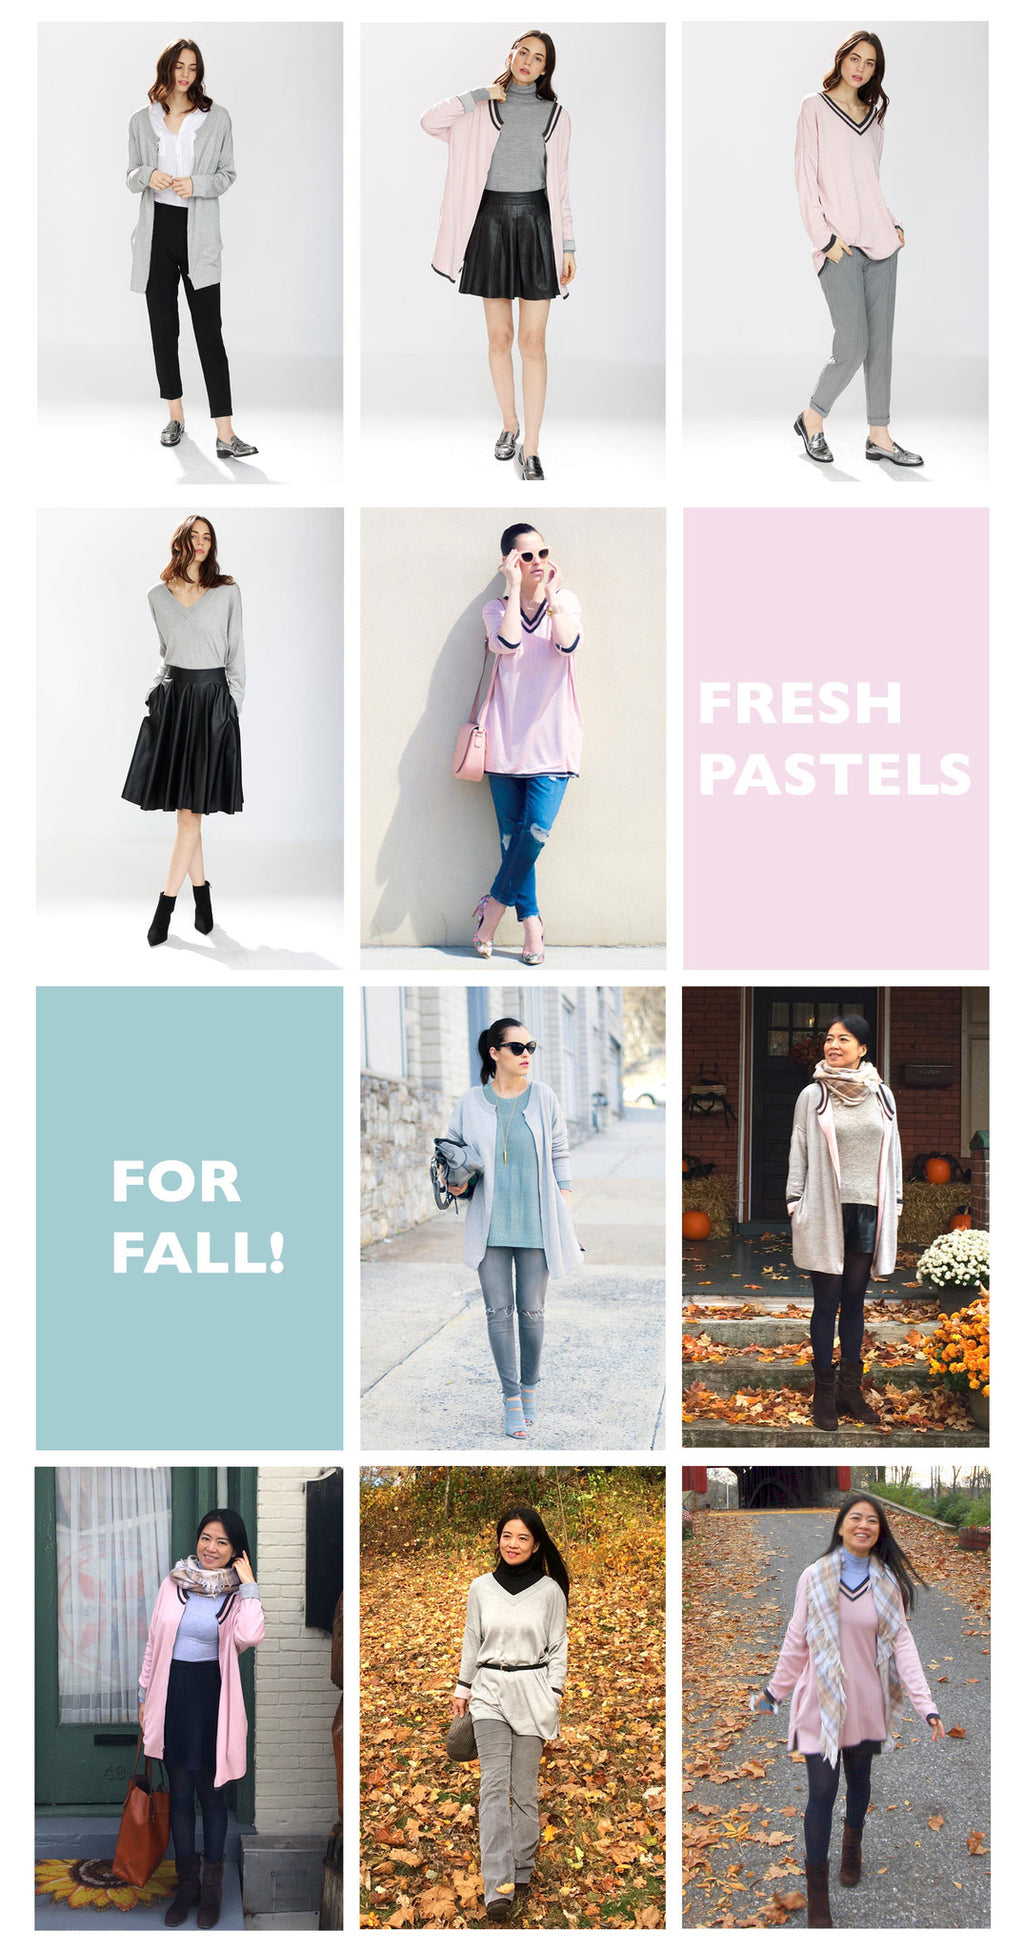 How to wear pastels in fall and winter - Christinabtv